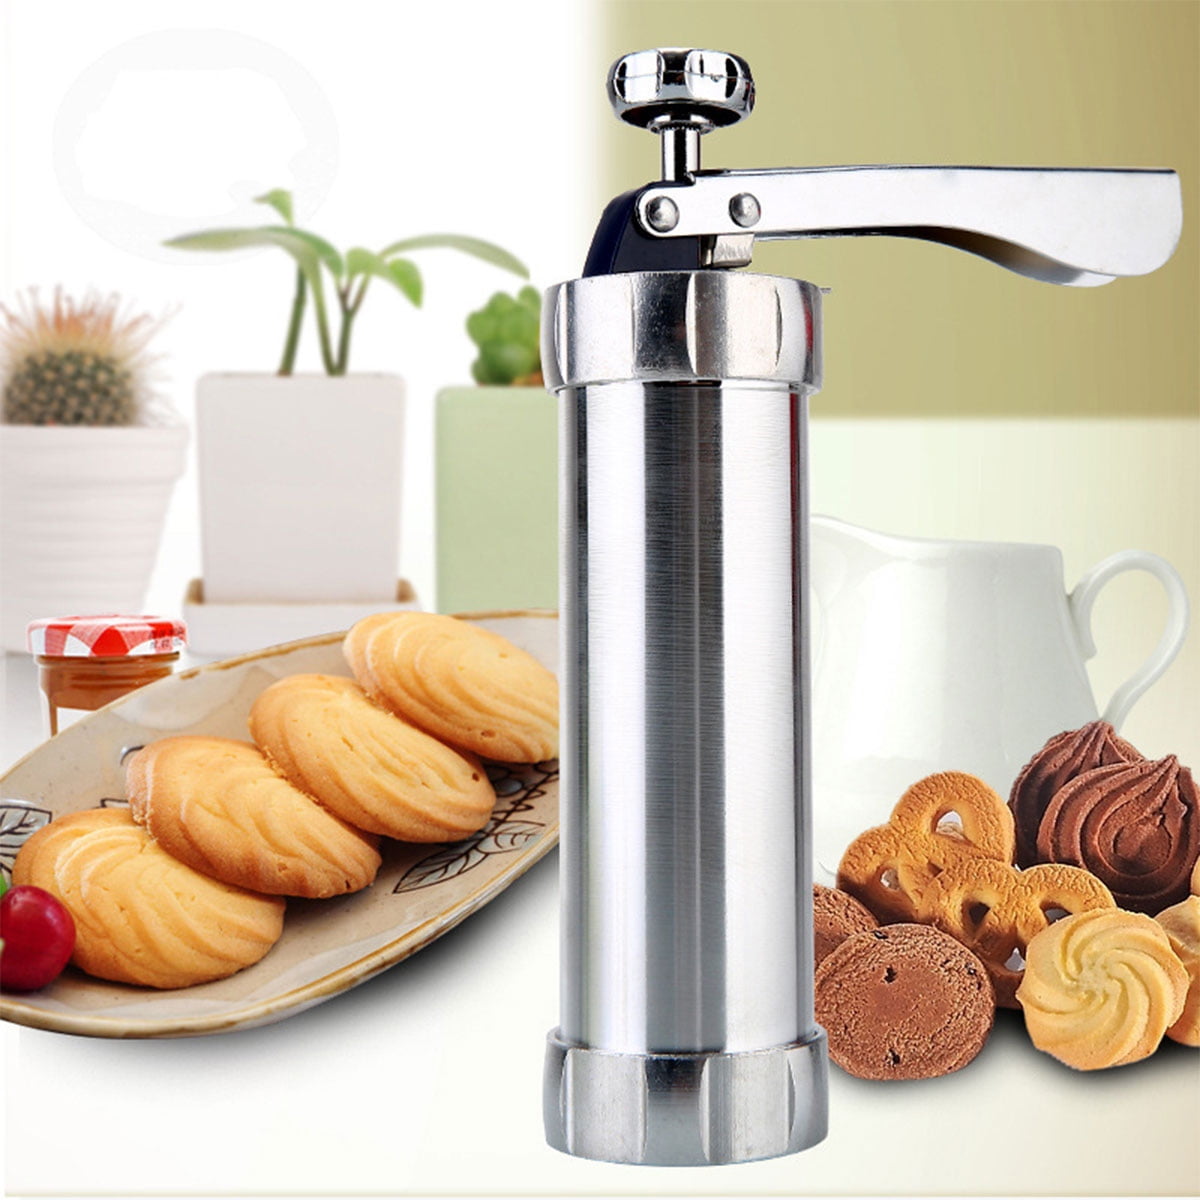 Fdit Simple Cookie Press Kit Cookie Biscuit Machine Safe Stainless